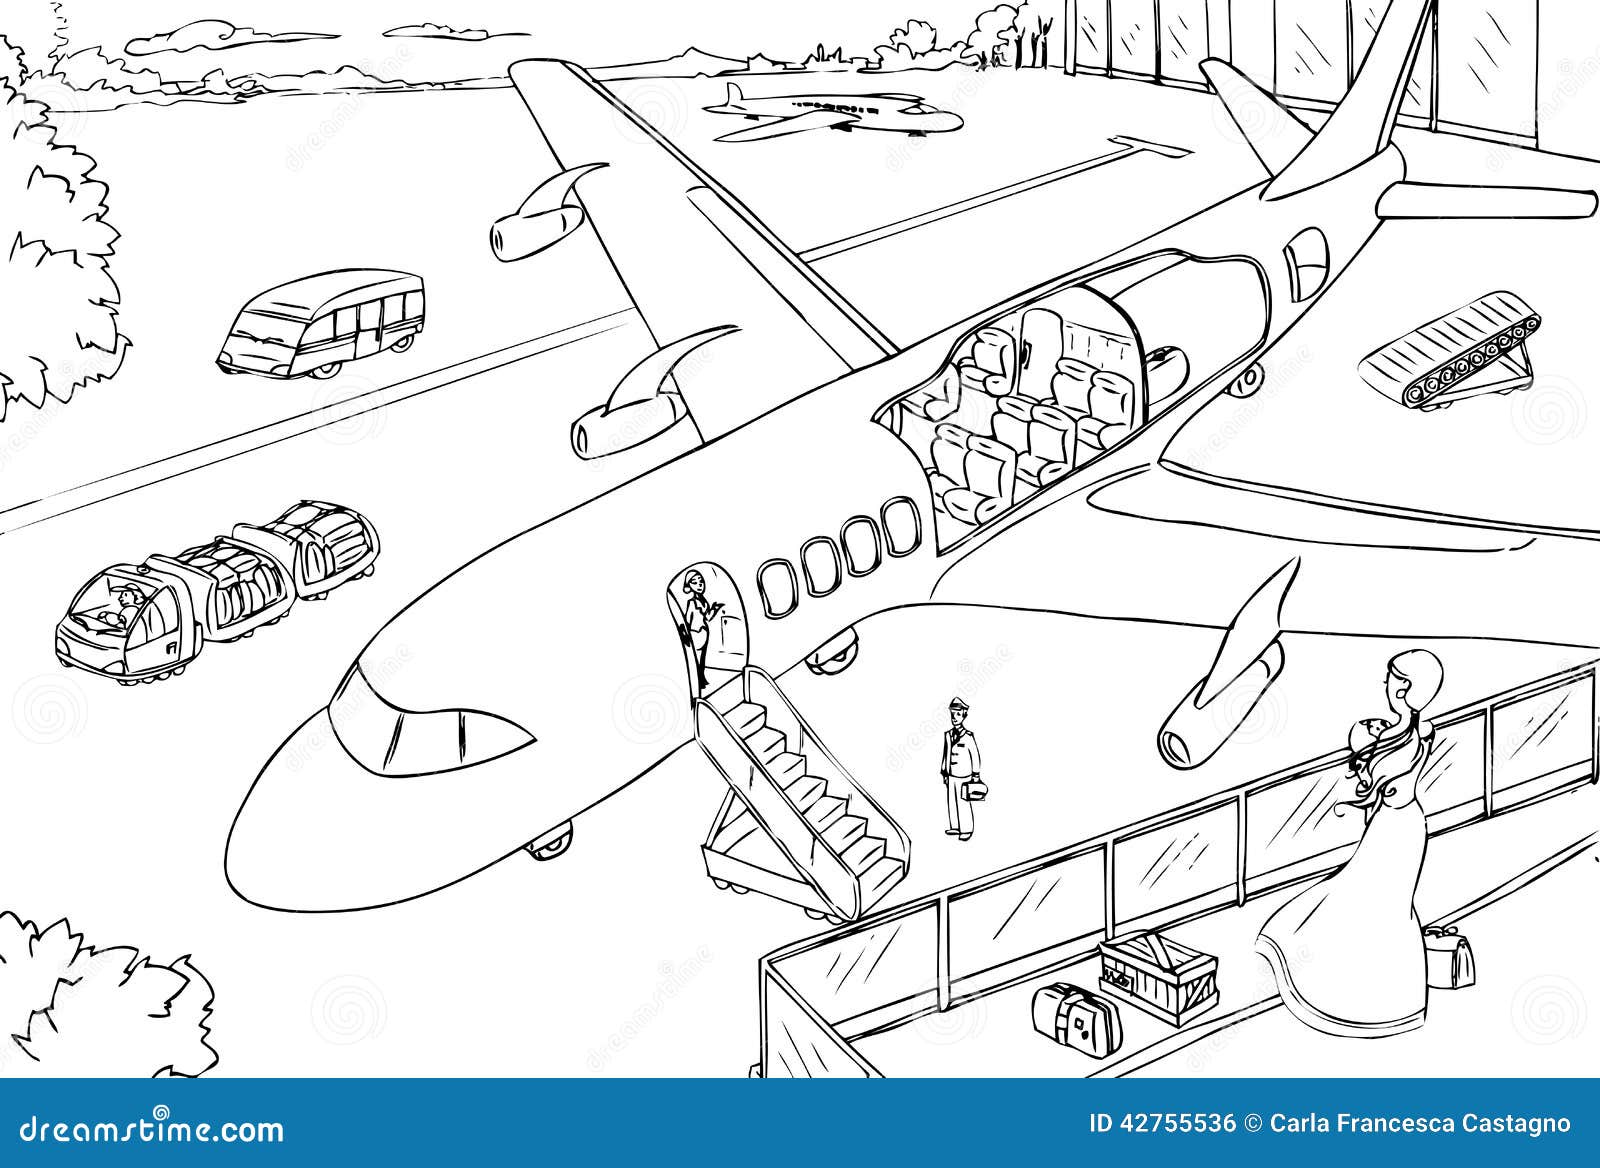 Airport Coloring Stock Illustrations – 20 Airport Coloring Stock ...